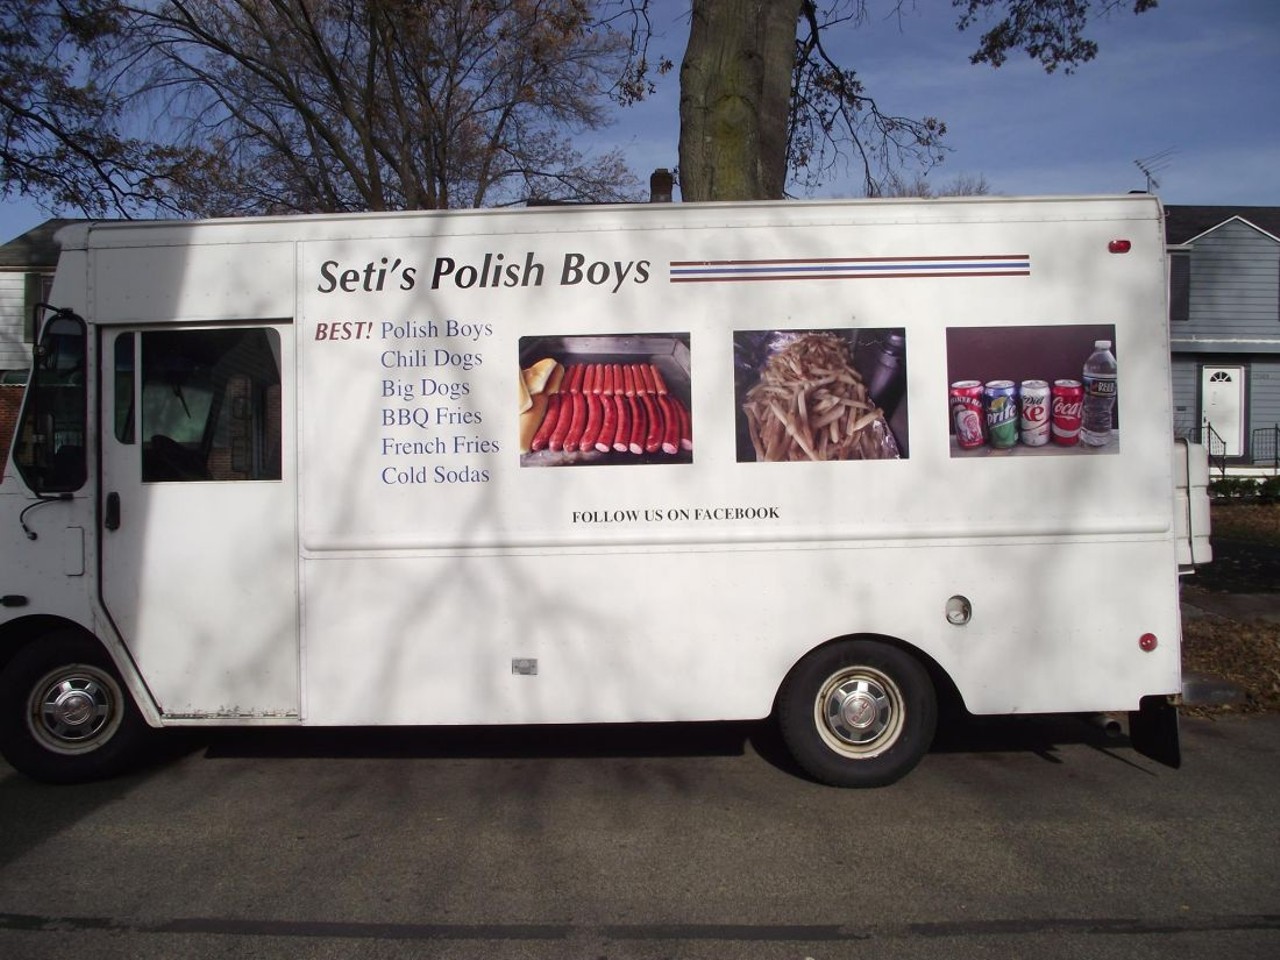 Polish Boy 
Where:  Add chili and cheese to your Polish Boy at the famous Seti's truck perennially parked at Dean Supply; Banter is another great spot for the sandwich.
Photo via Seti&#146;s Polish Boys/Facebook